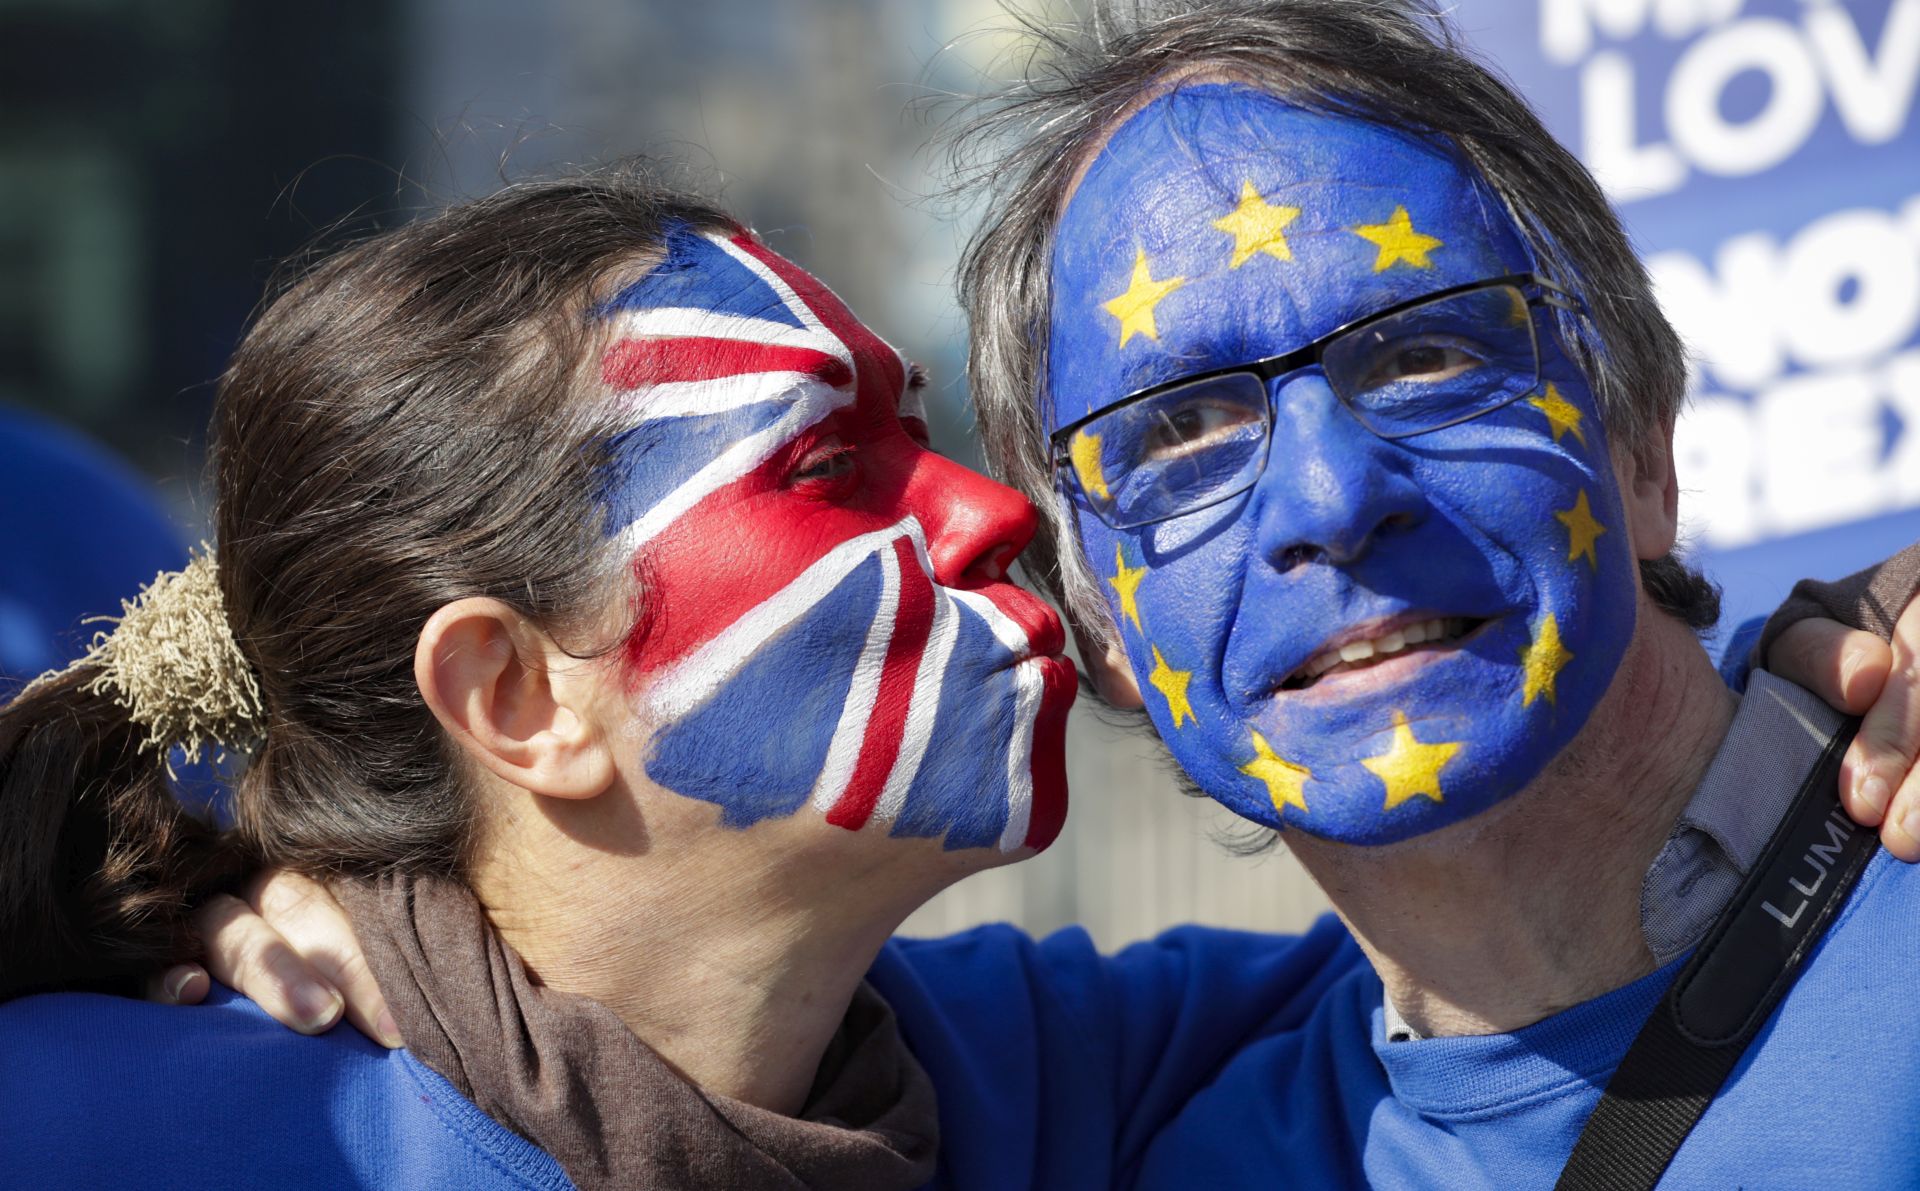 epa07452916 Two protesters with their faces painted with the colors of EU and British flags during a protest staged by about 20 anti-Brexit demonstrators calling for a second referendum on Brexit in front of EU Commission Building ahead of EU Summit in Brussels, Belgium, 21 March 2019. European Union leaders will gather for a two-day summit to discuss, among others, Brexit and British PM request to extend Article 50.  EPA/OLIVIER HOSLET